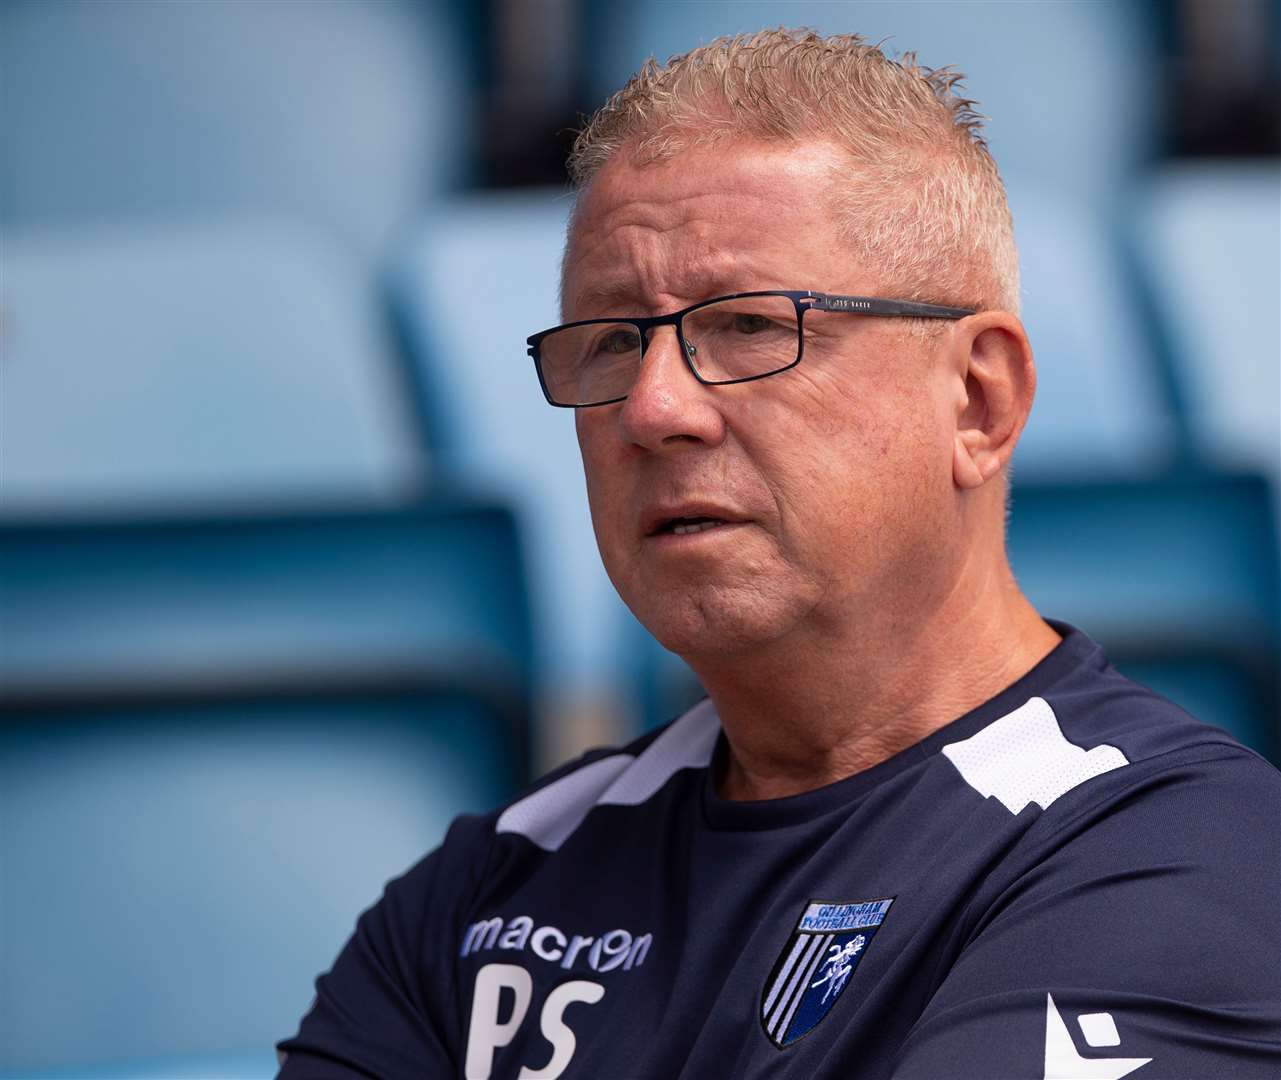 Gillingham chairman Paul Scally takes a cut in fees as club makes over £500k loss